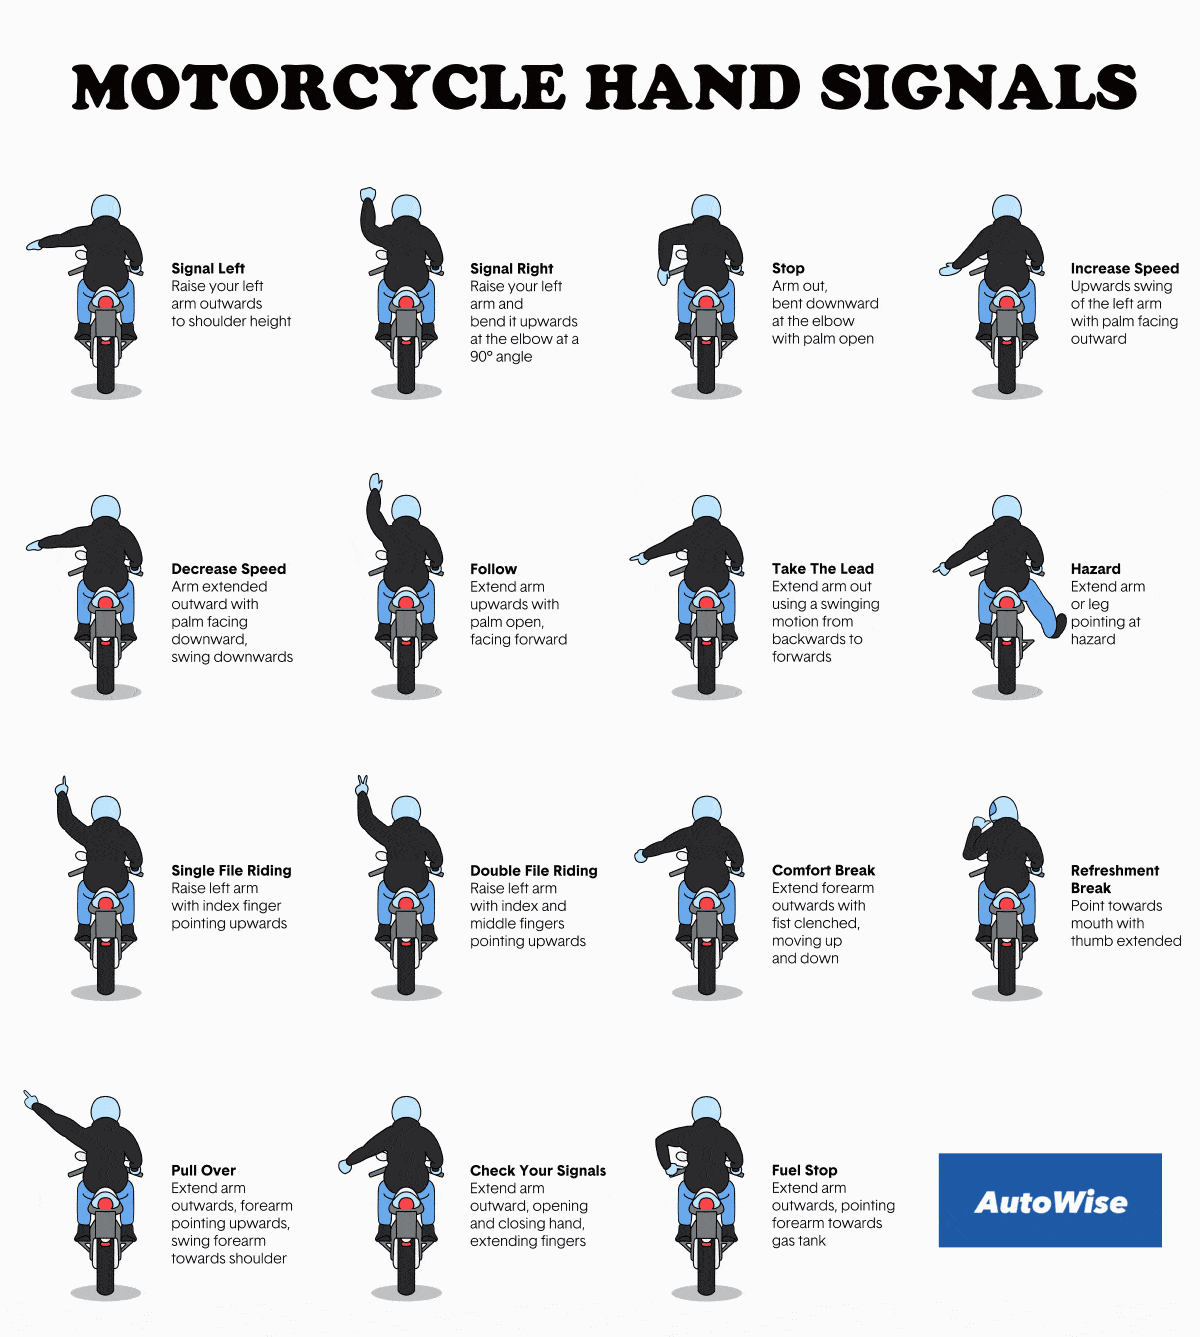 Motorcycle Hand Signals Overview